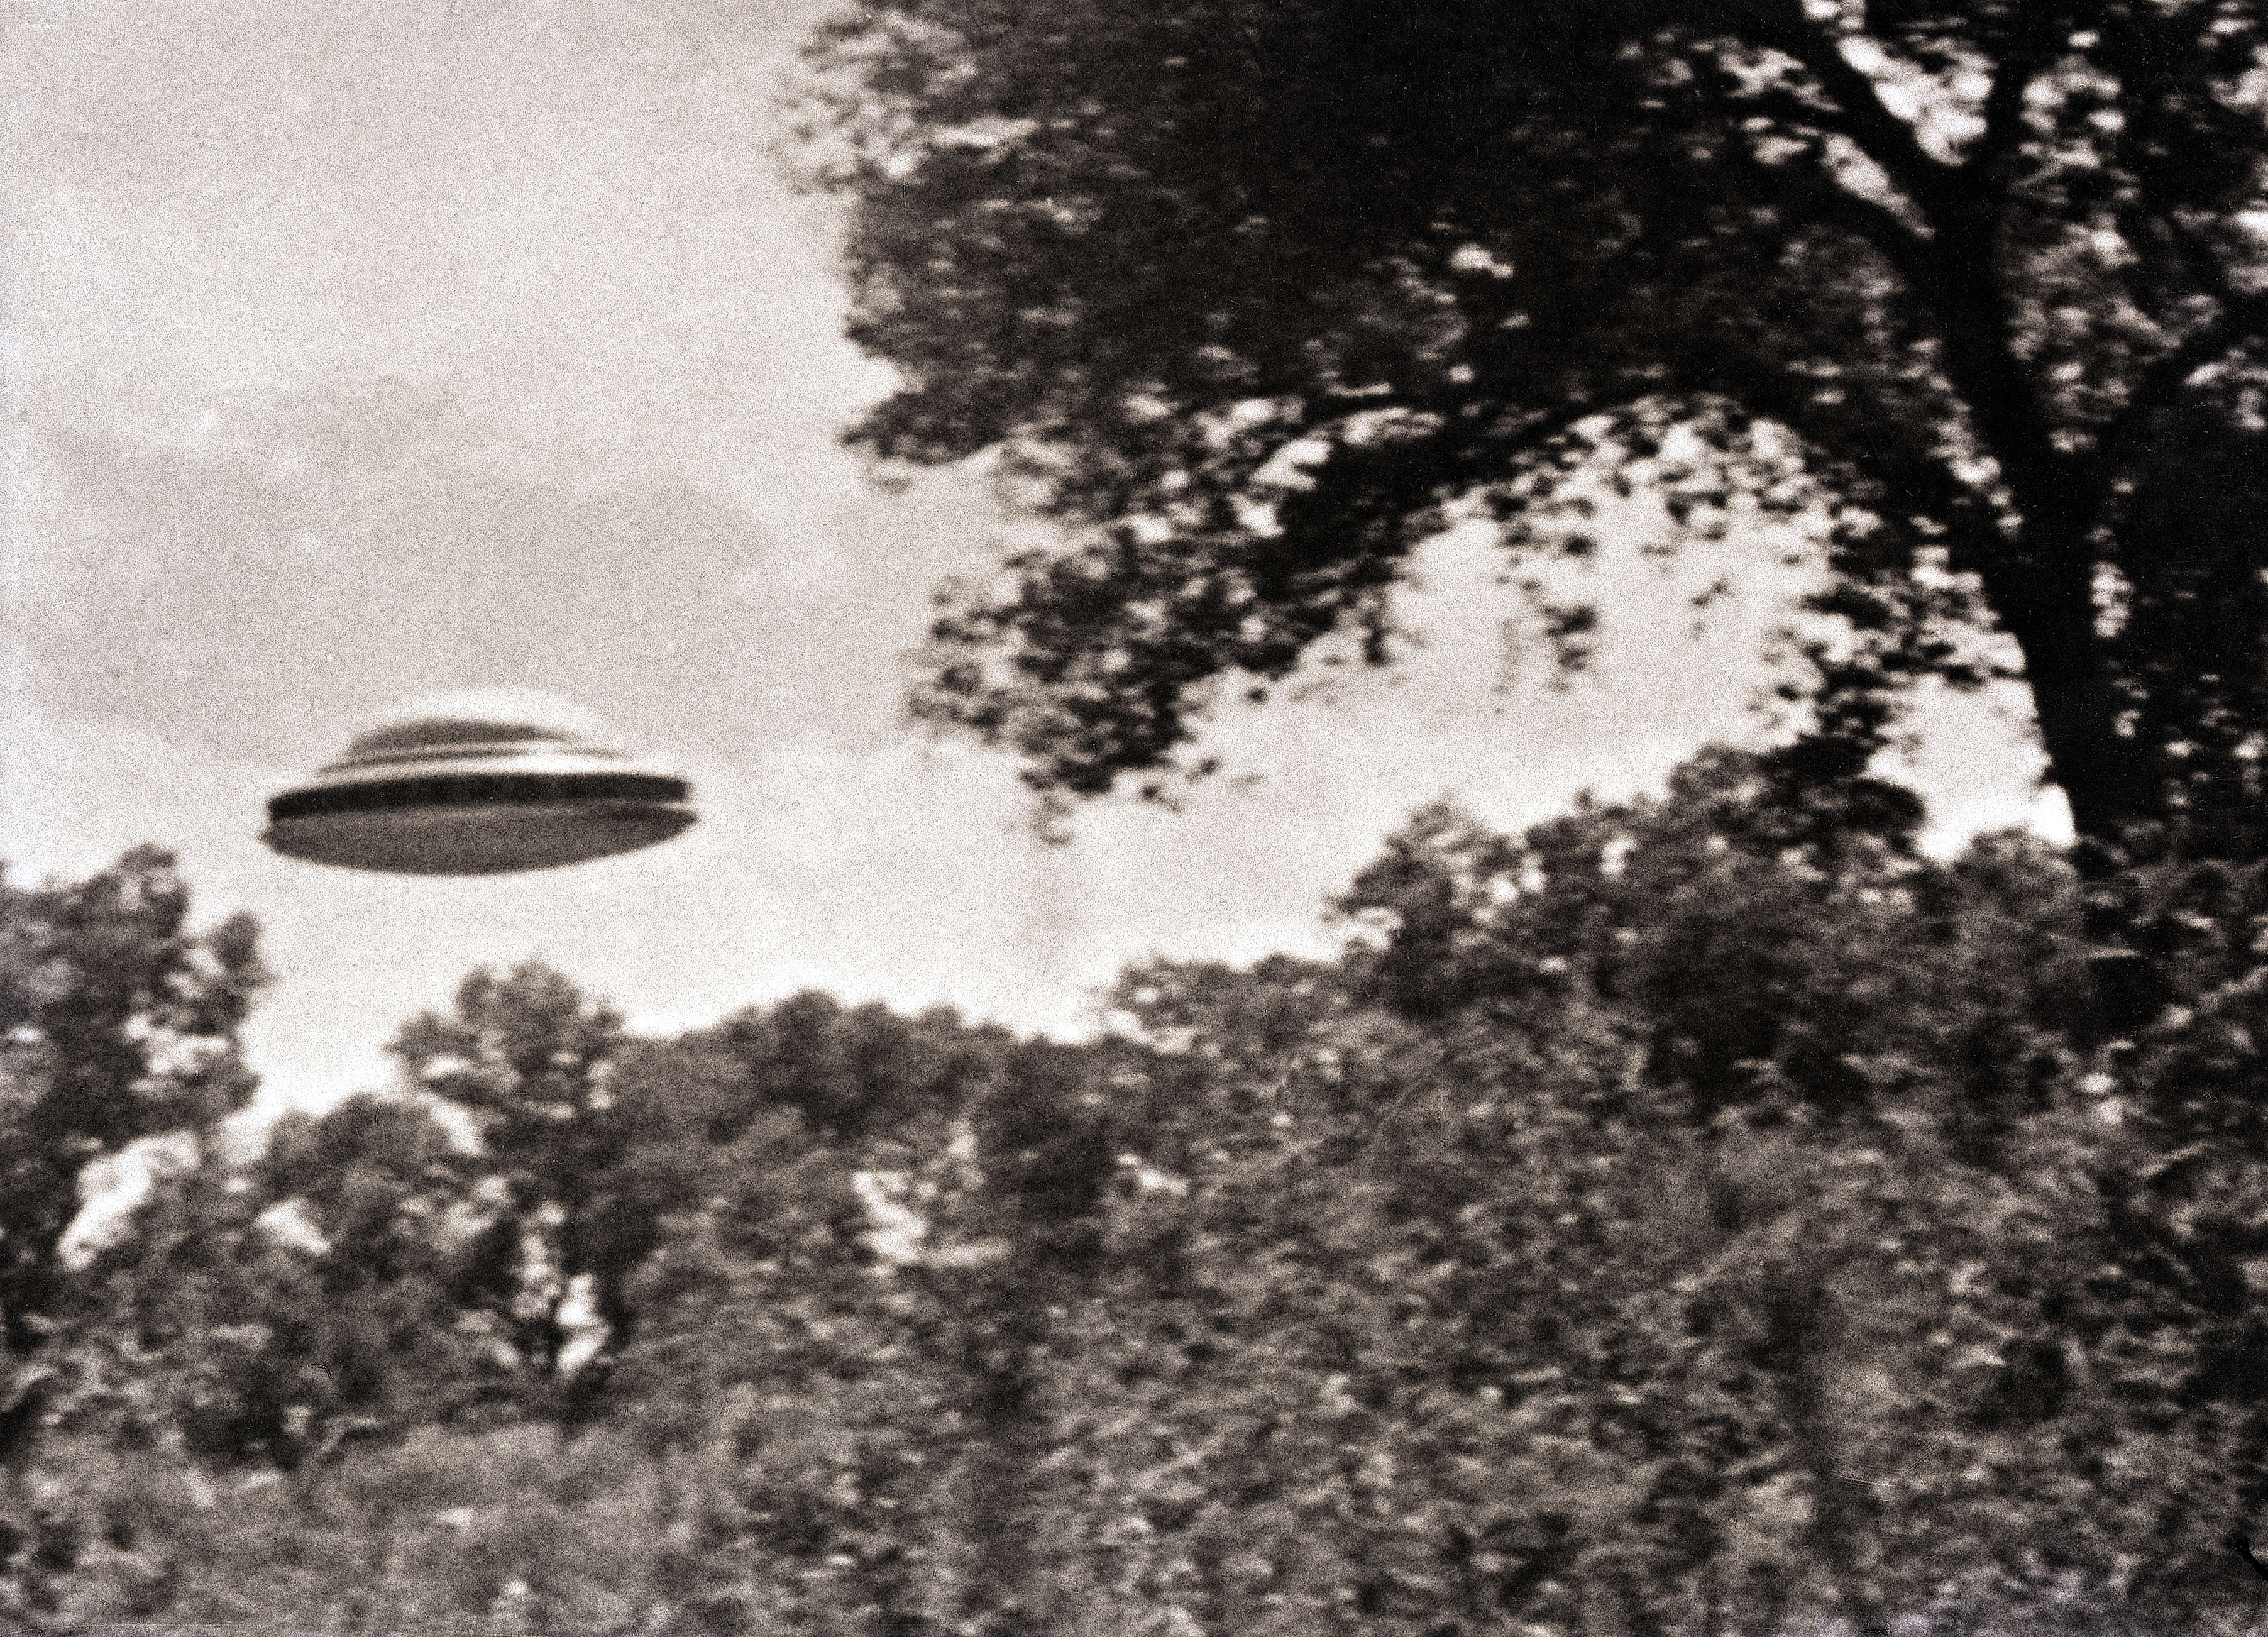 Government officials say UFOs are airborne trash, not aliens | SYFY WIRE